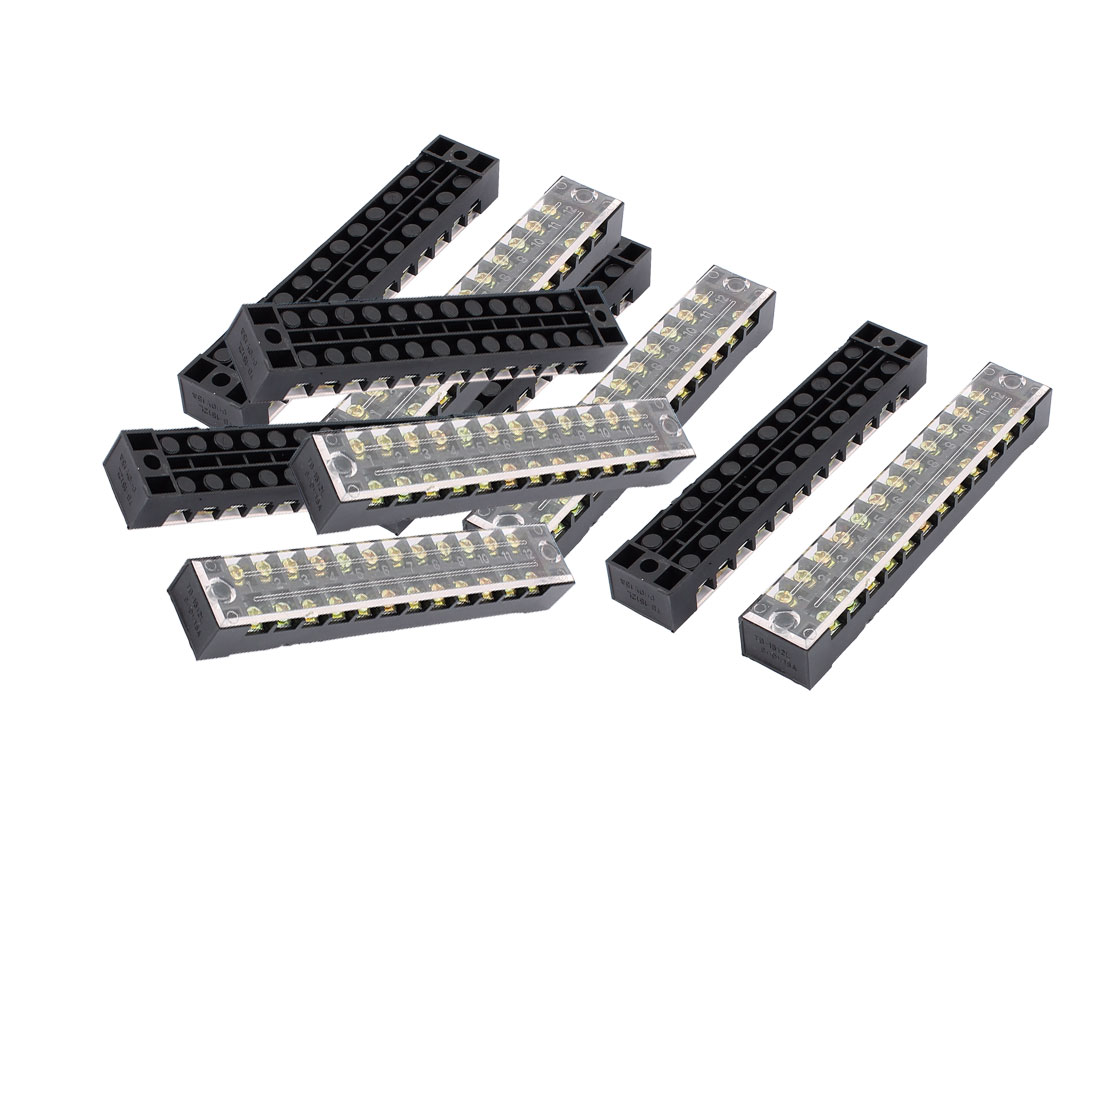 10 Pcs 600V 15A 12P Screw Electrical Barrier Terminal Block Cable Connector Bar - image 5 of 5